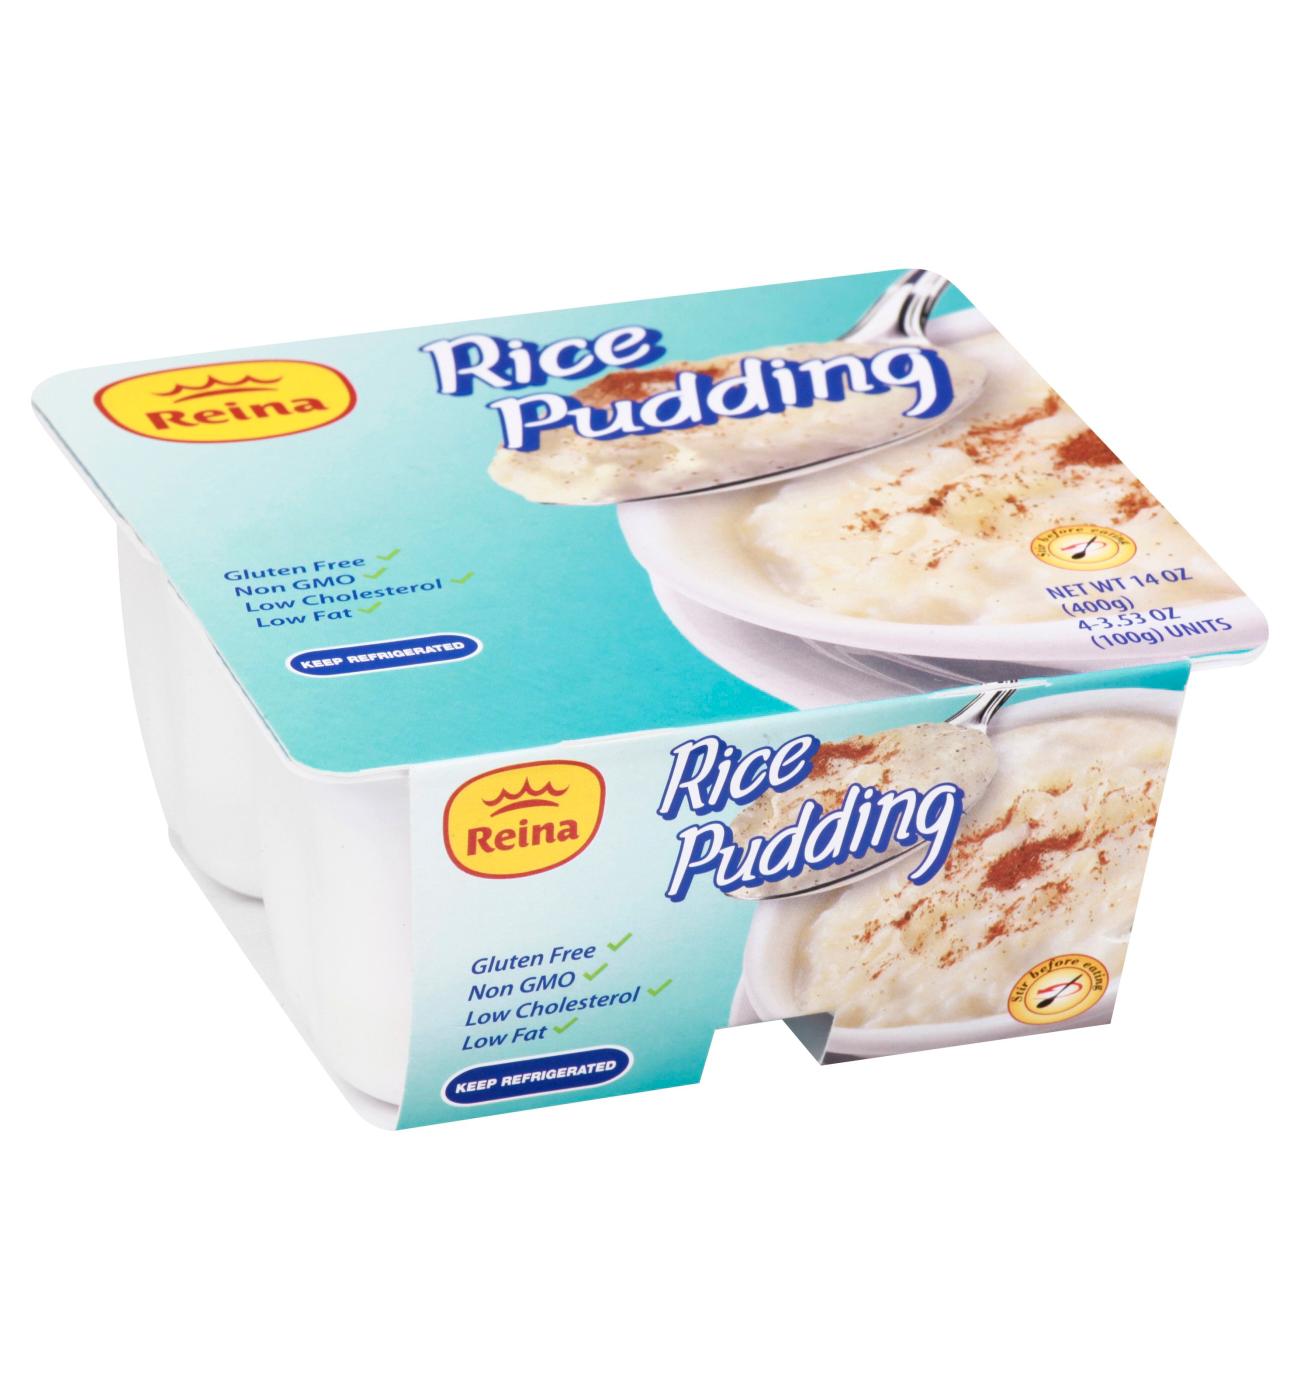 Reina Rice Pudding Cups; image 1 of 2